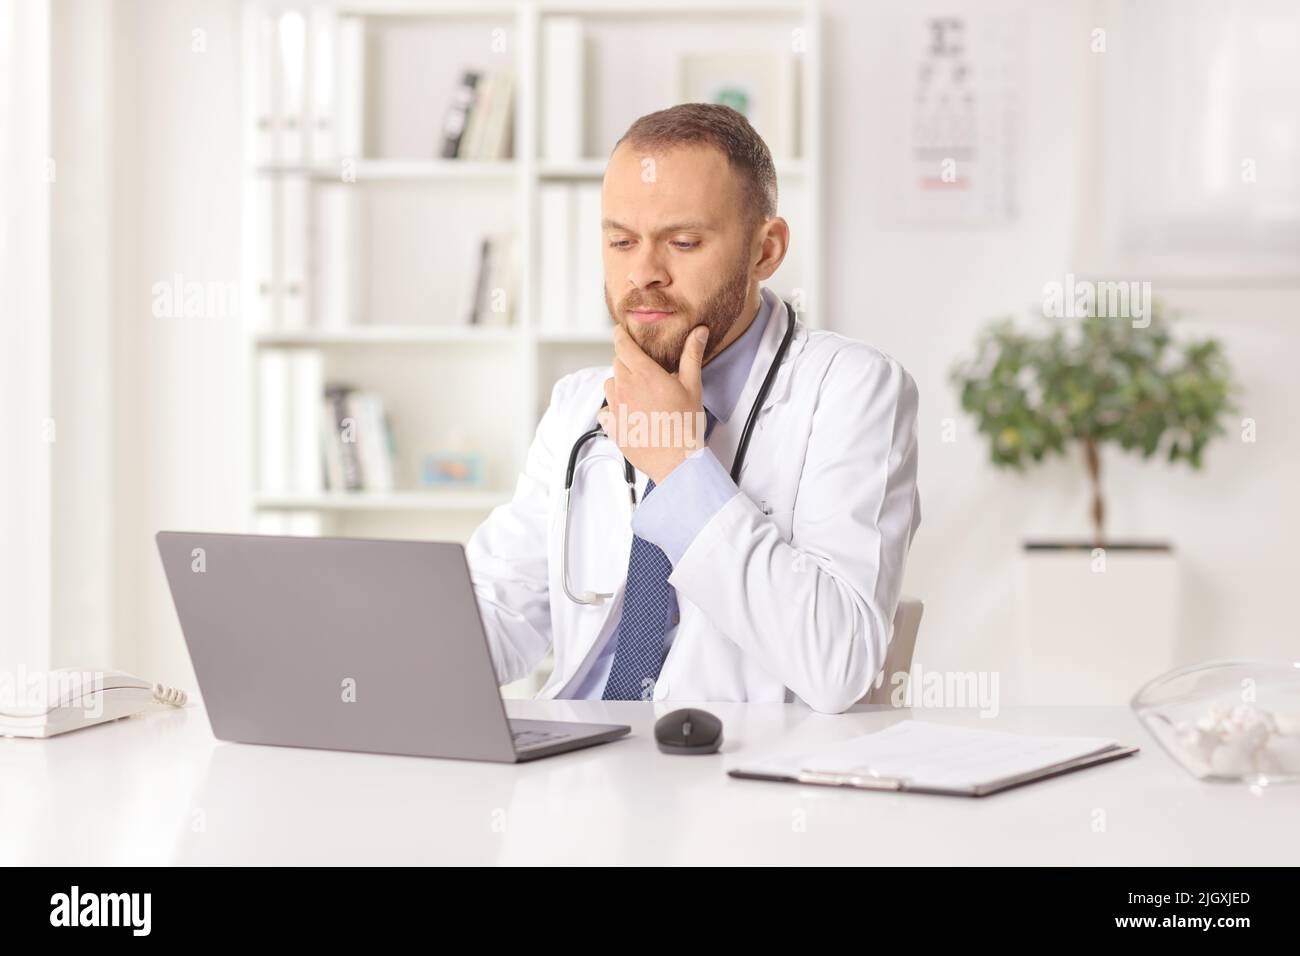 Serious male doctor sitting in an office and looking at a laptop computer Stock Photo